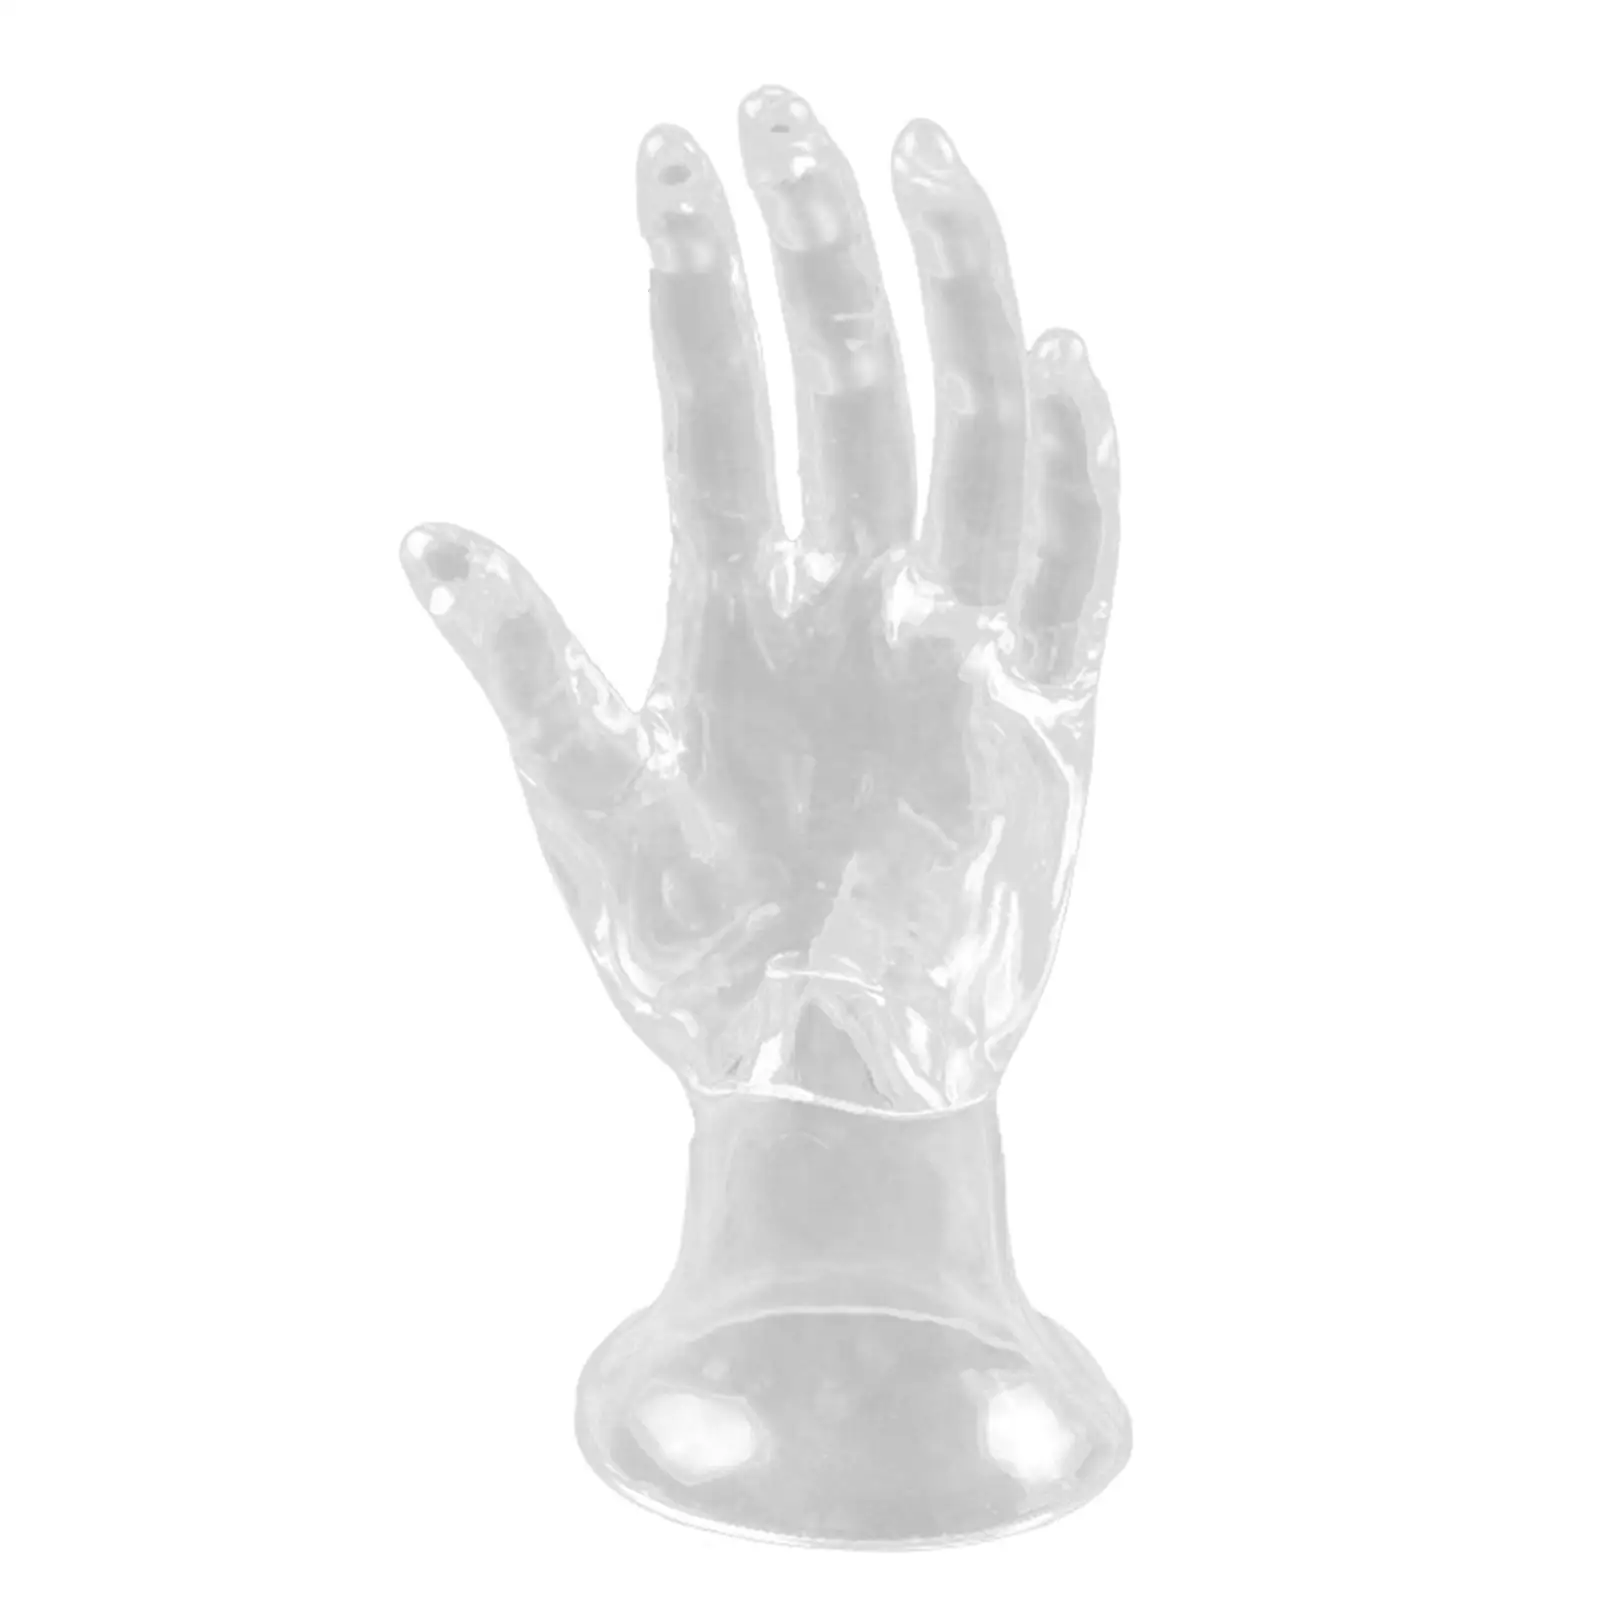 Mannequin Hand Jewelry Display Holder Tower for Bangle Shop Home Decor Hand Form